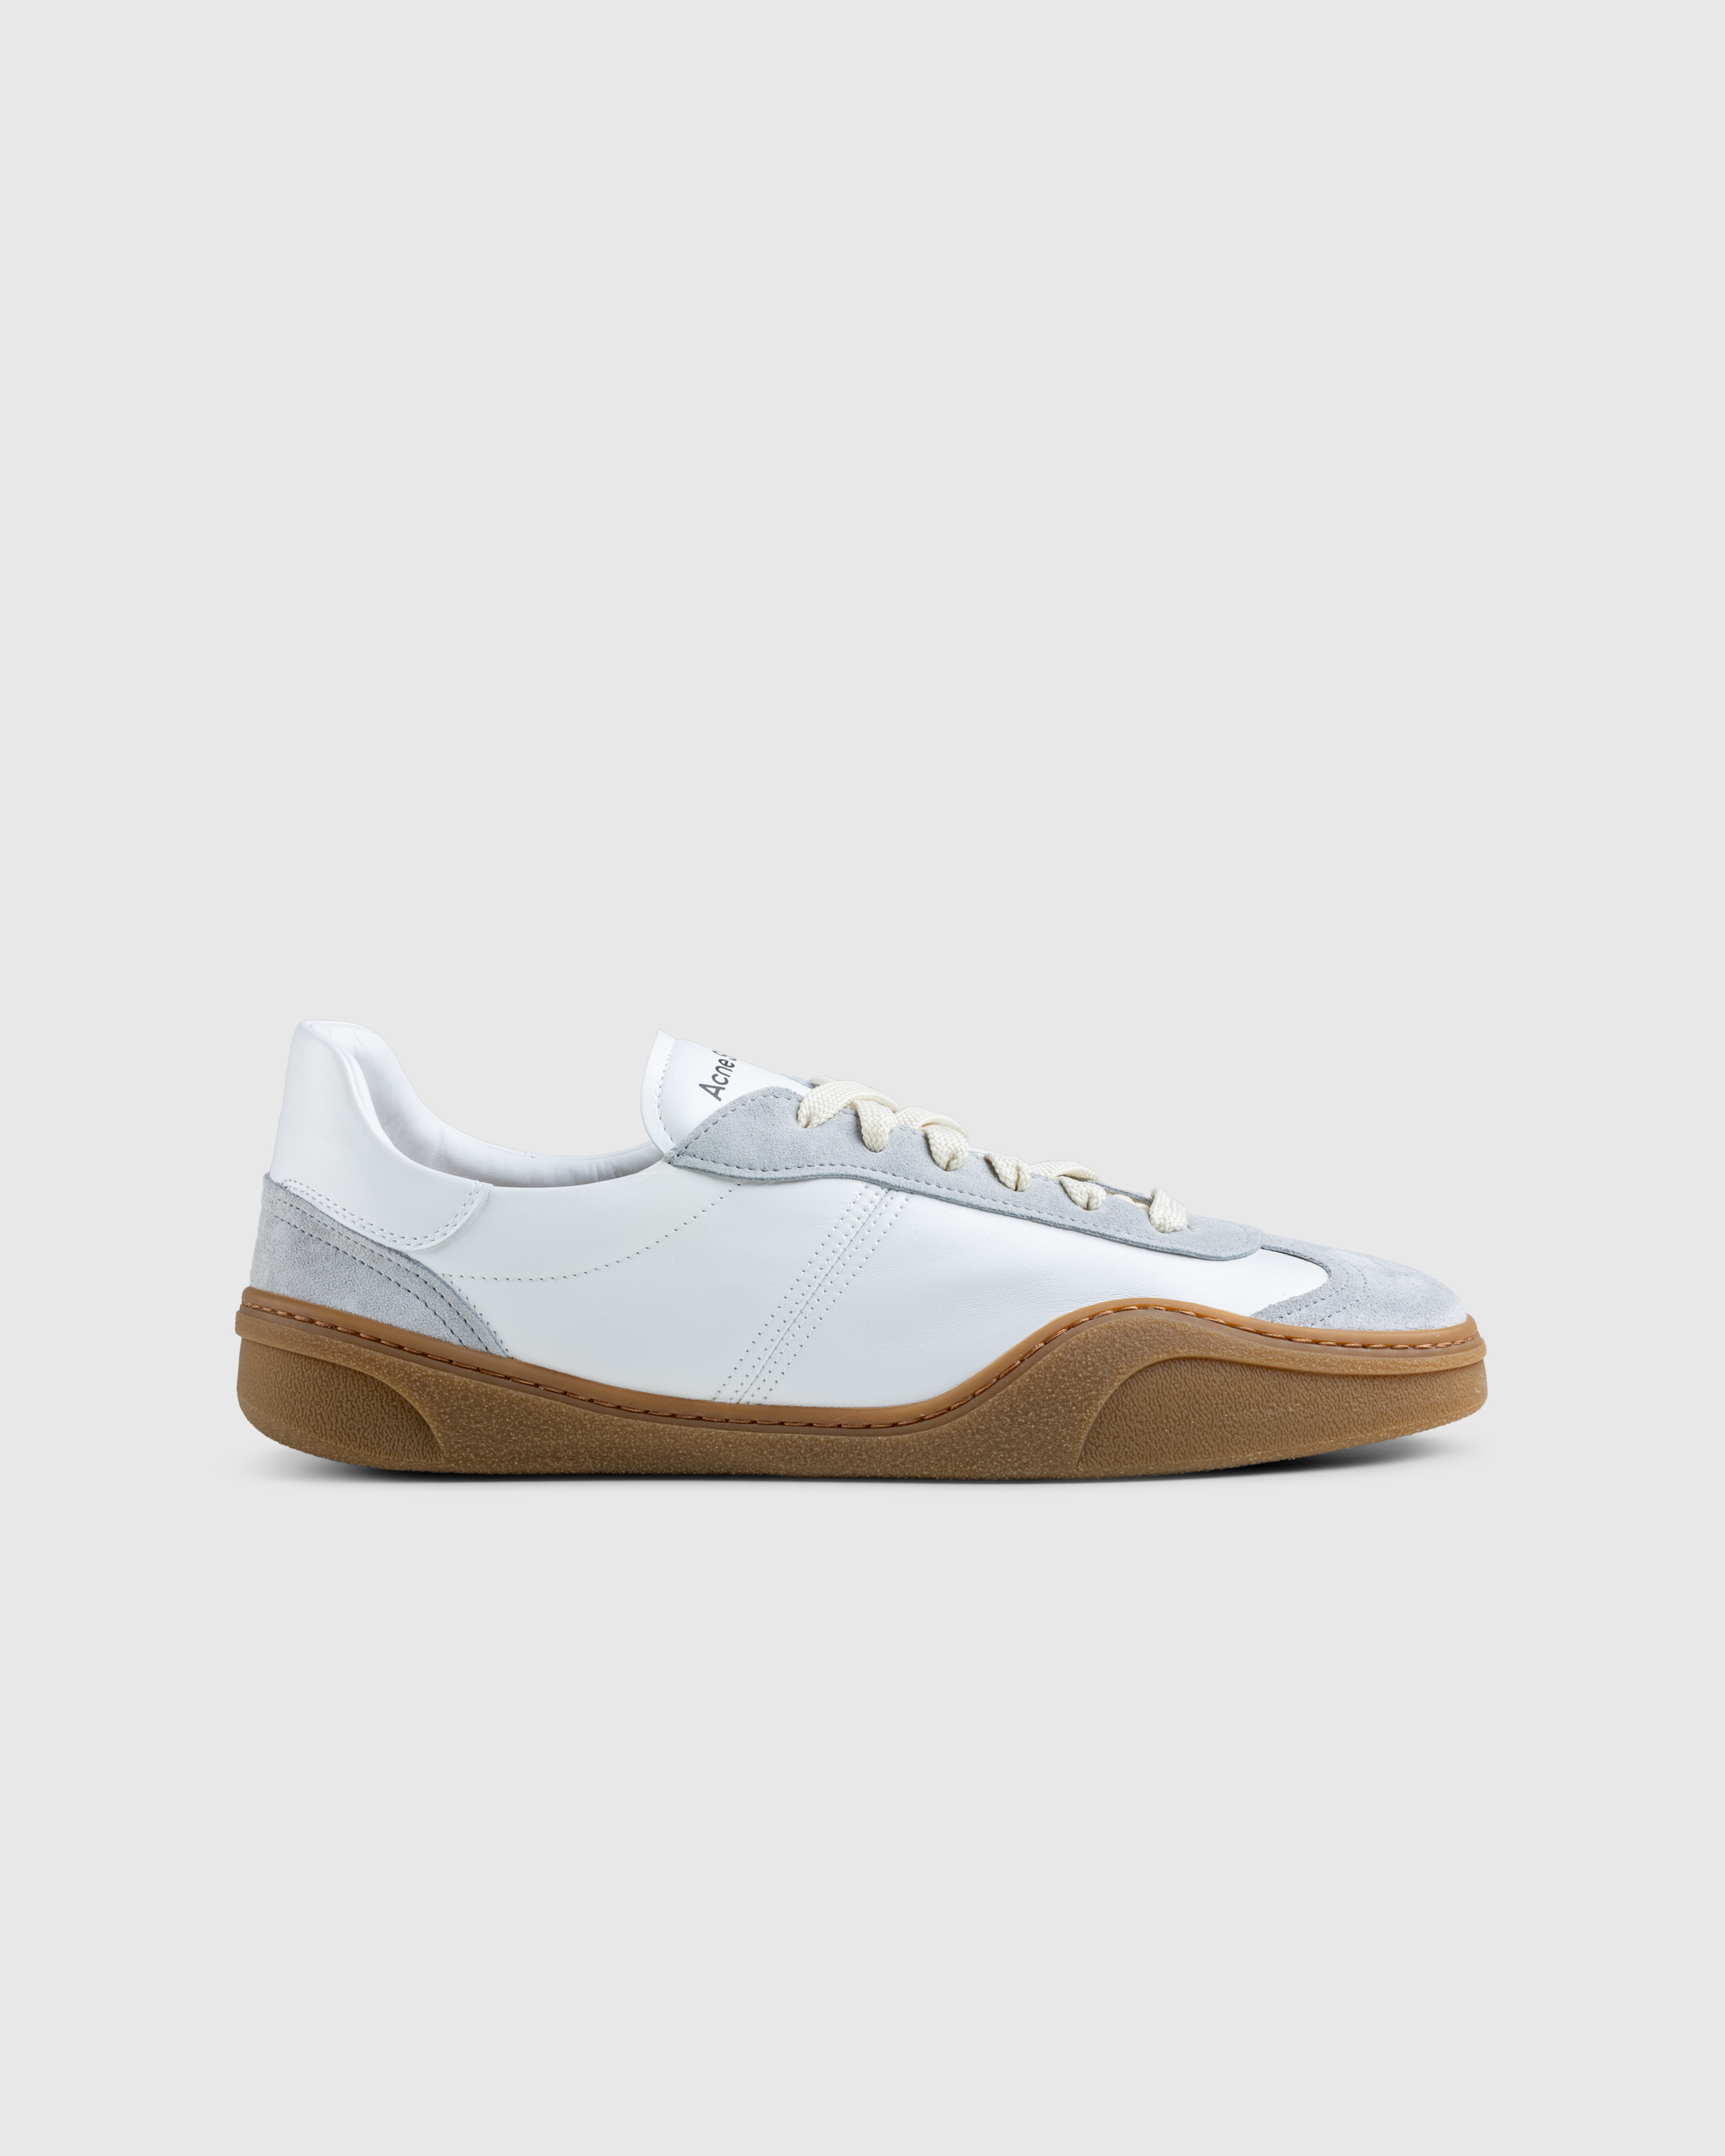 Acne Studios – Lace-Up Sneakers White/Brown - Low Top Sneakers - White - Image 1